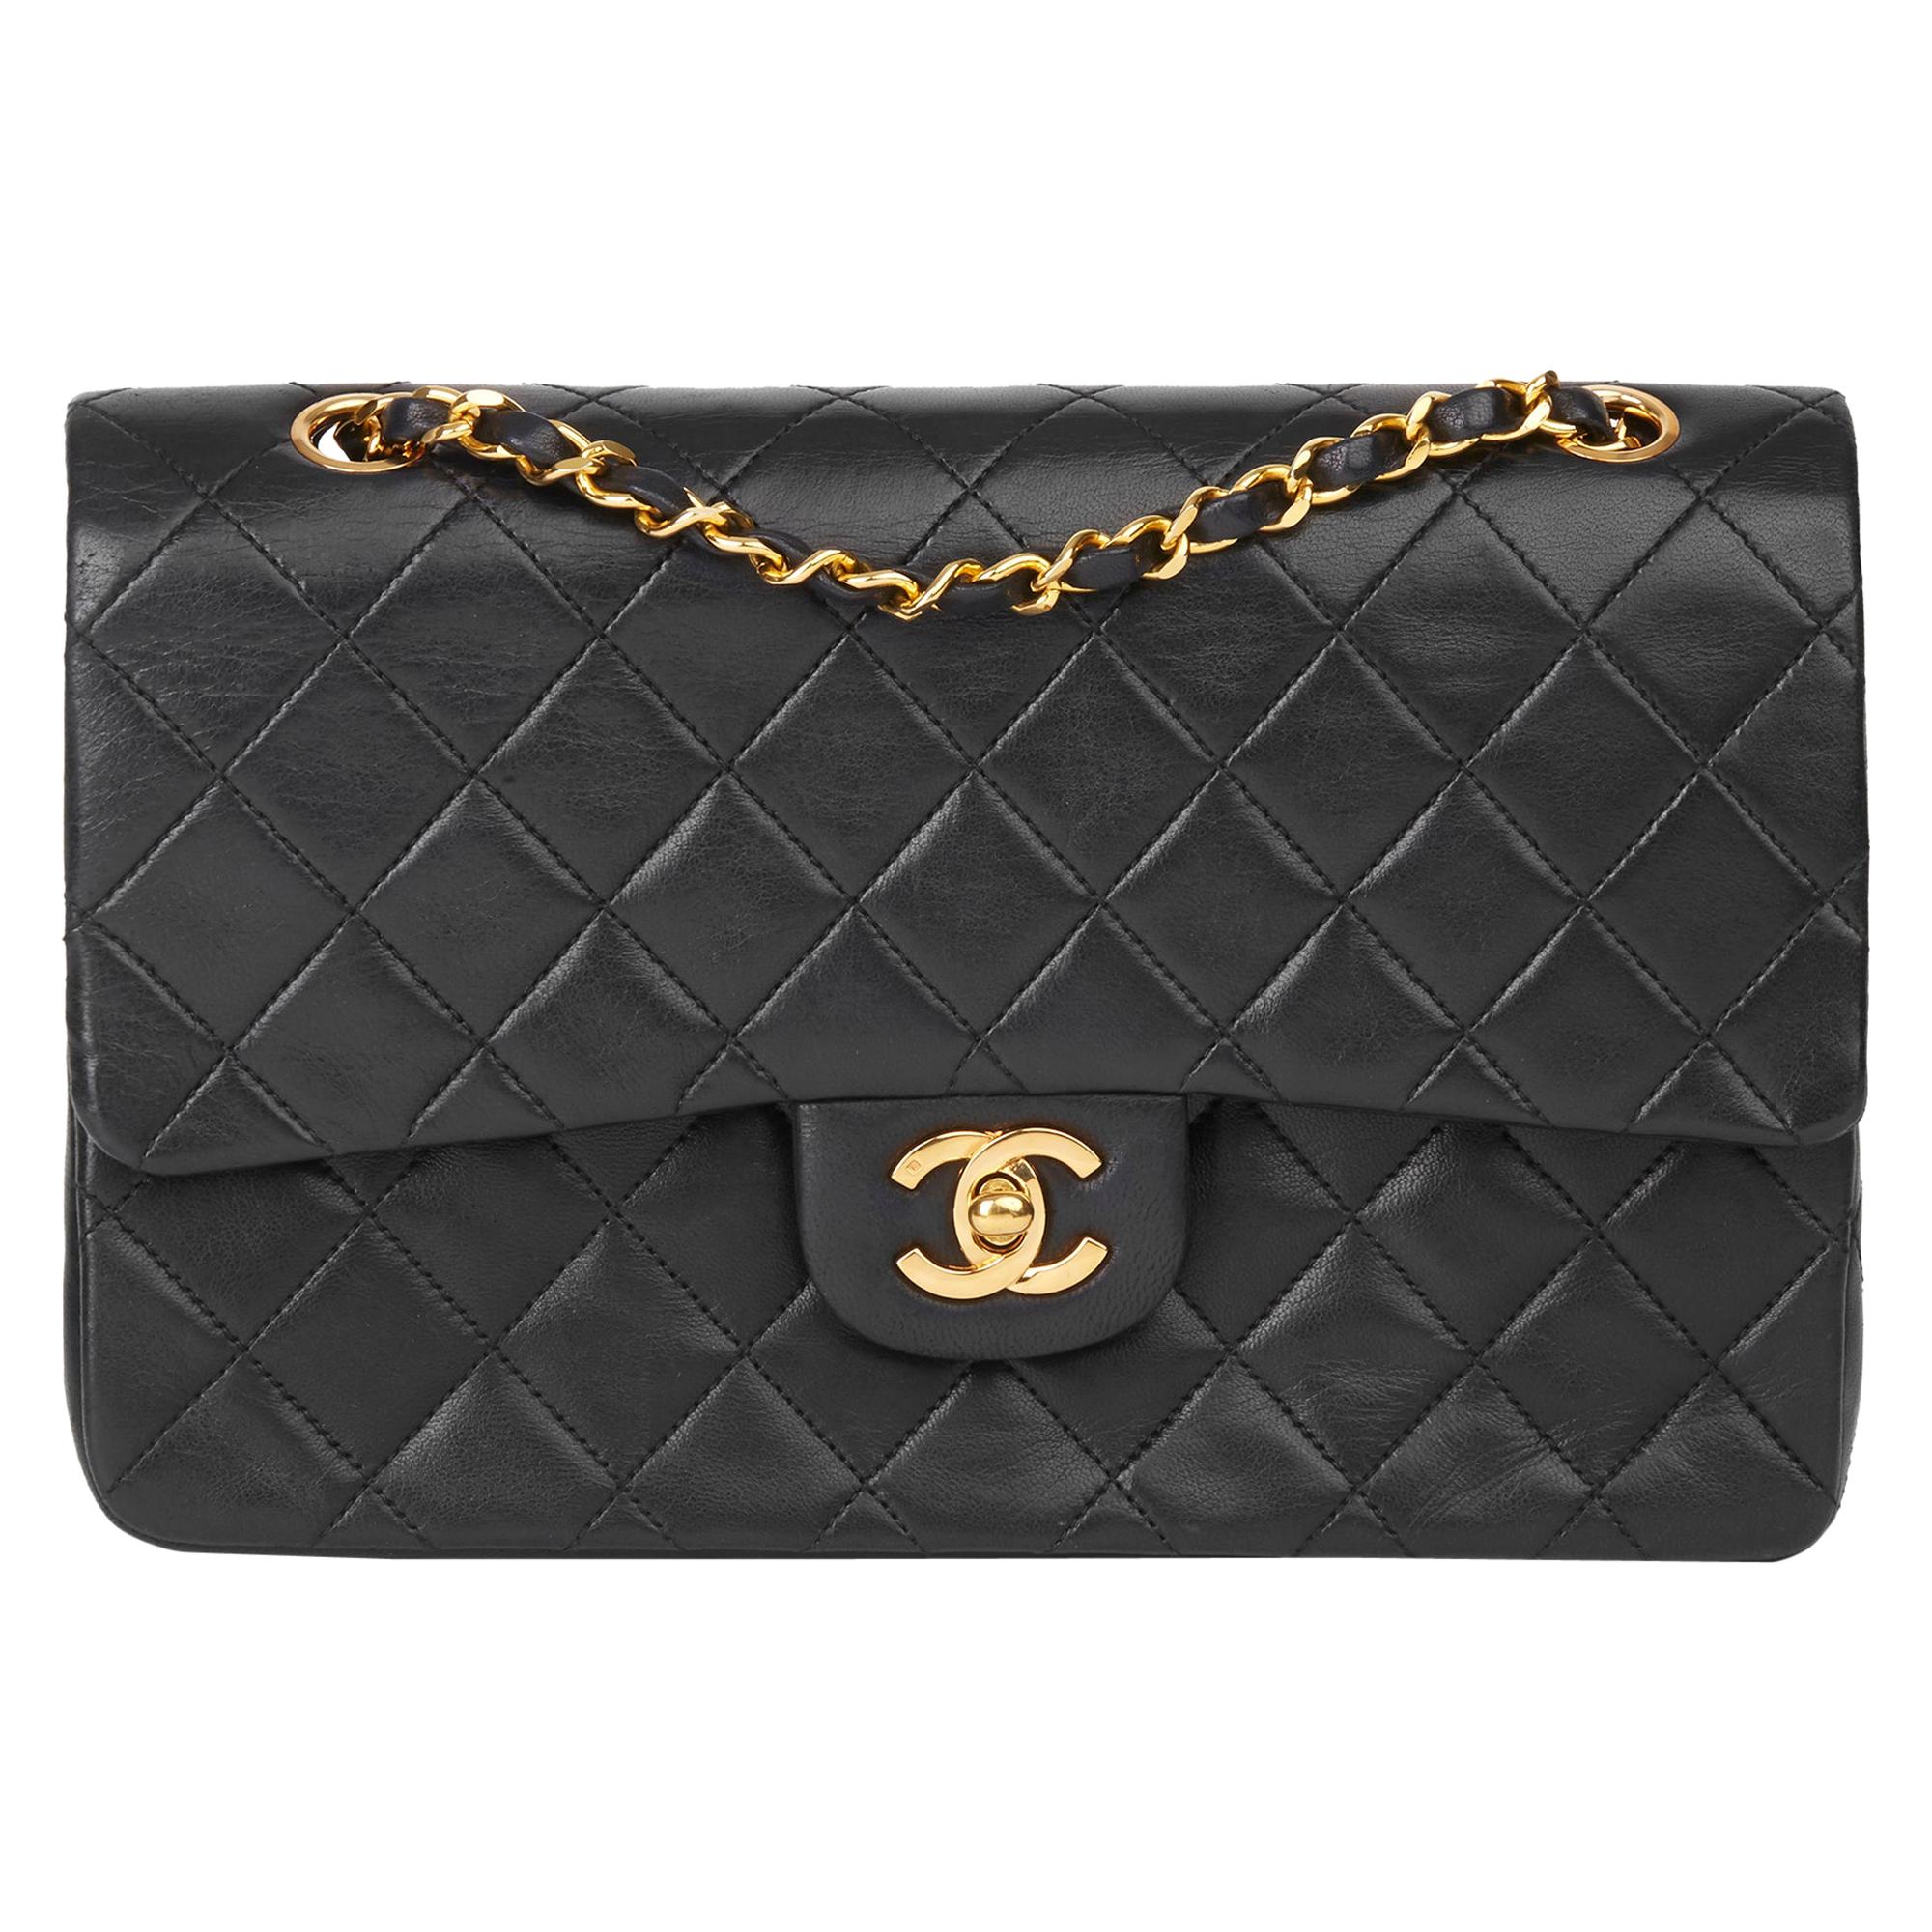 1990 Chanel Black Quilted Lambskin Vintage Medium Classic Double Flap Bag 